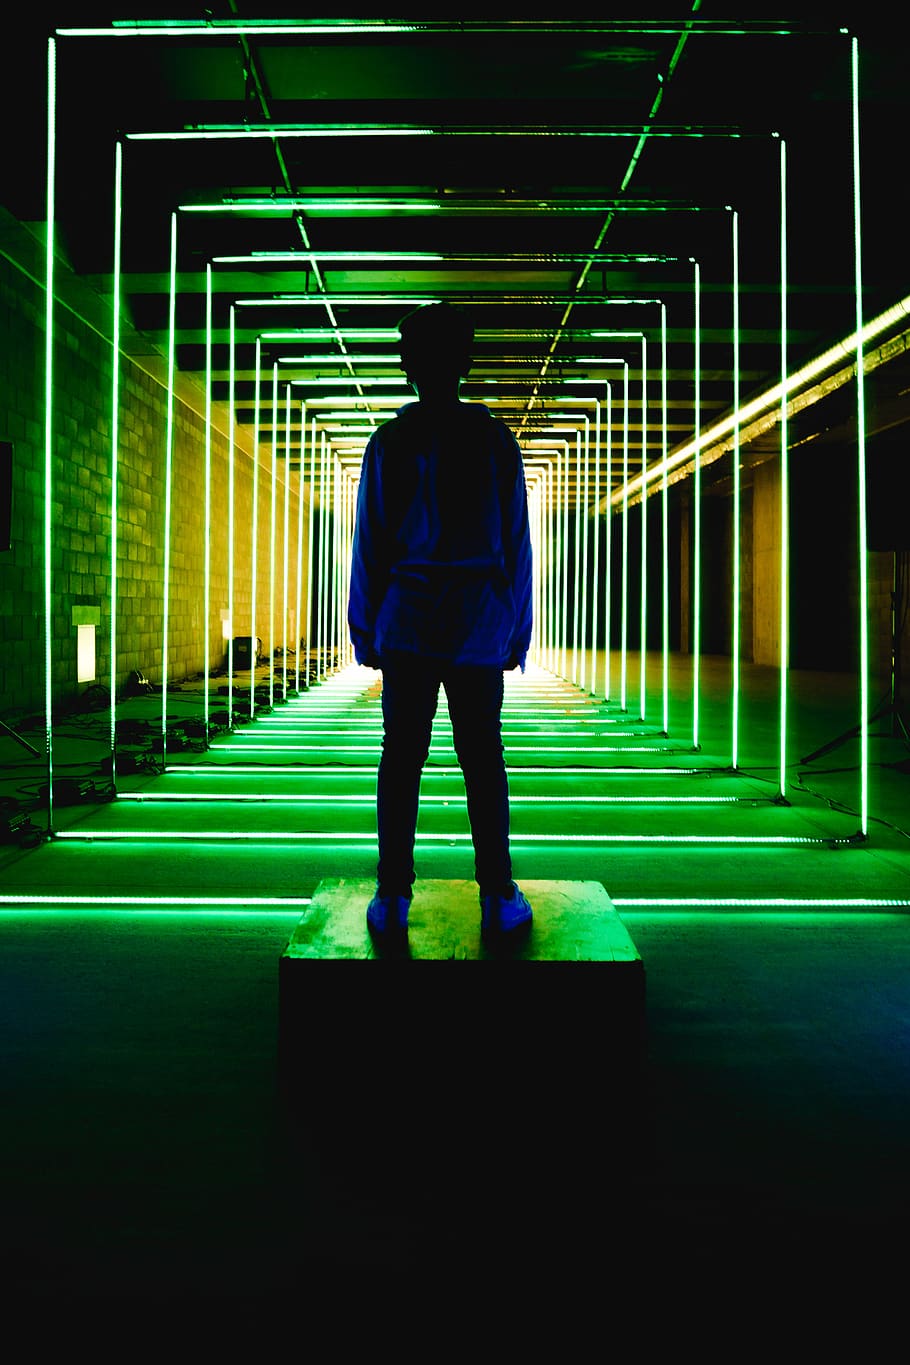 Silhouette Photo of Person Standing in Neon Lit Hallway, artsy